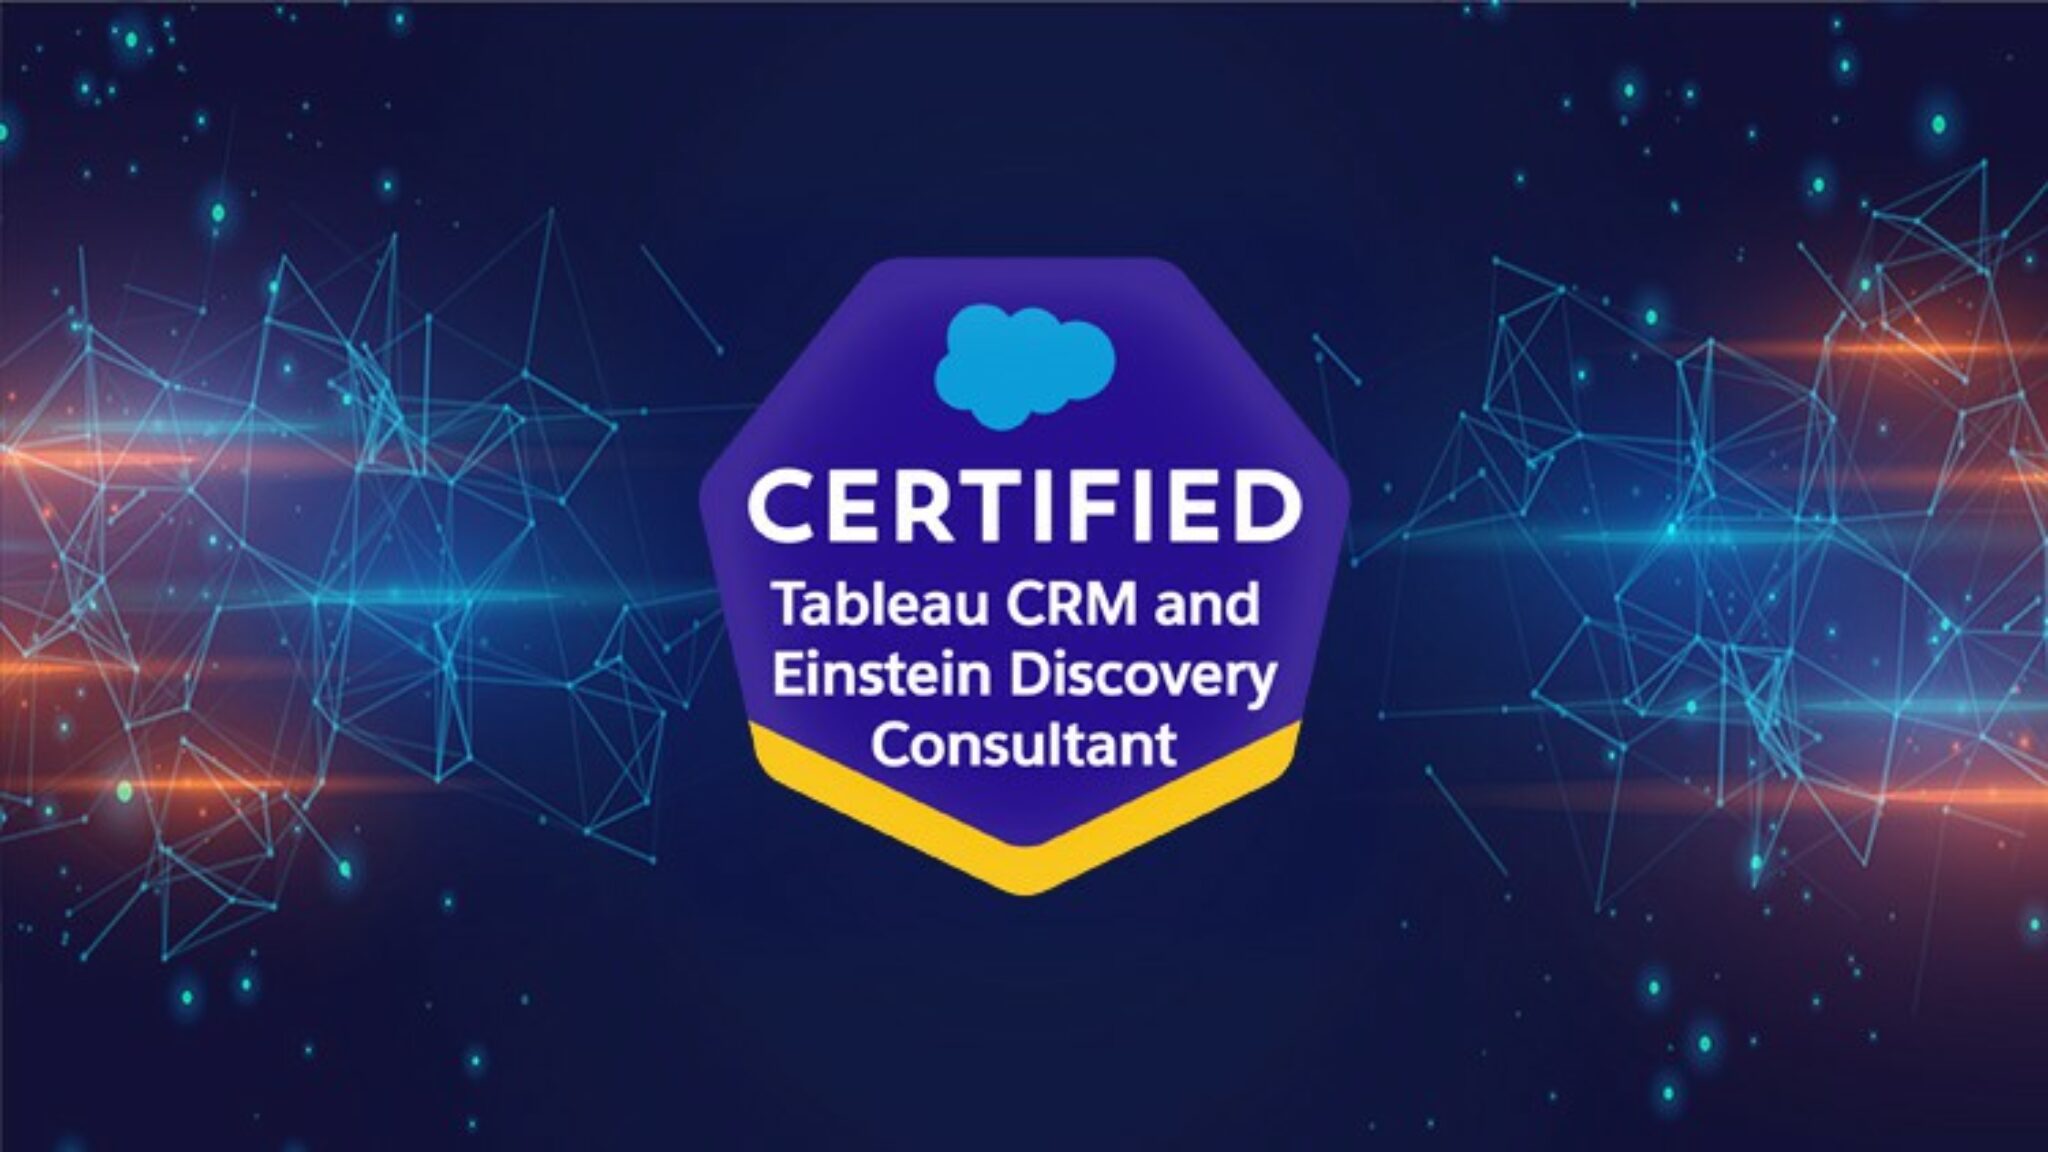 Tableau-CRM-Einstein-Discovery-Consultant Testking